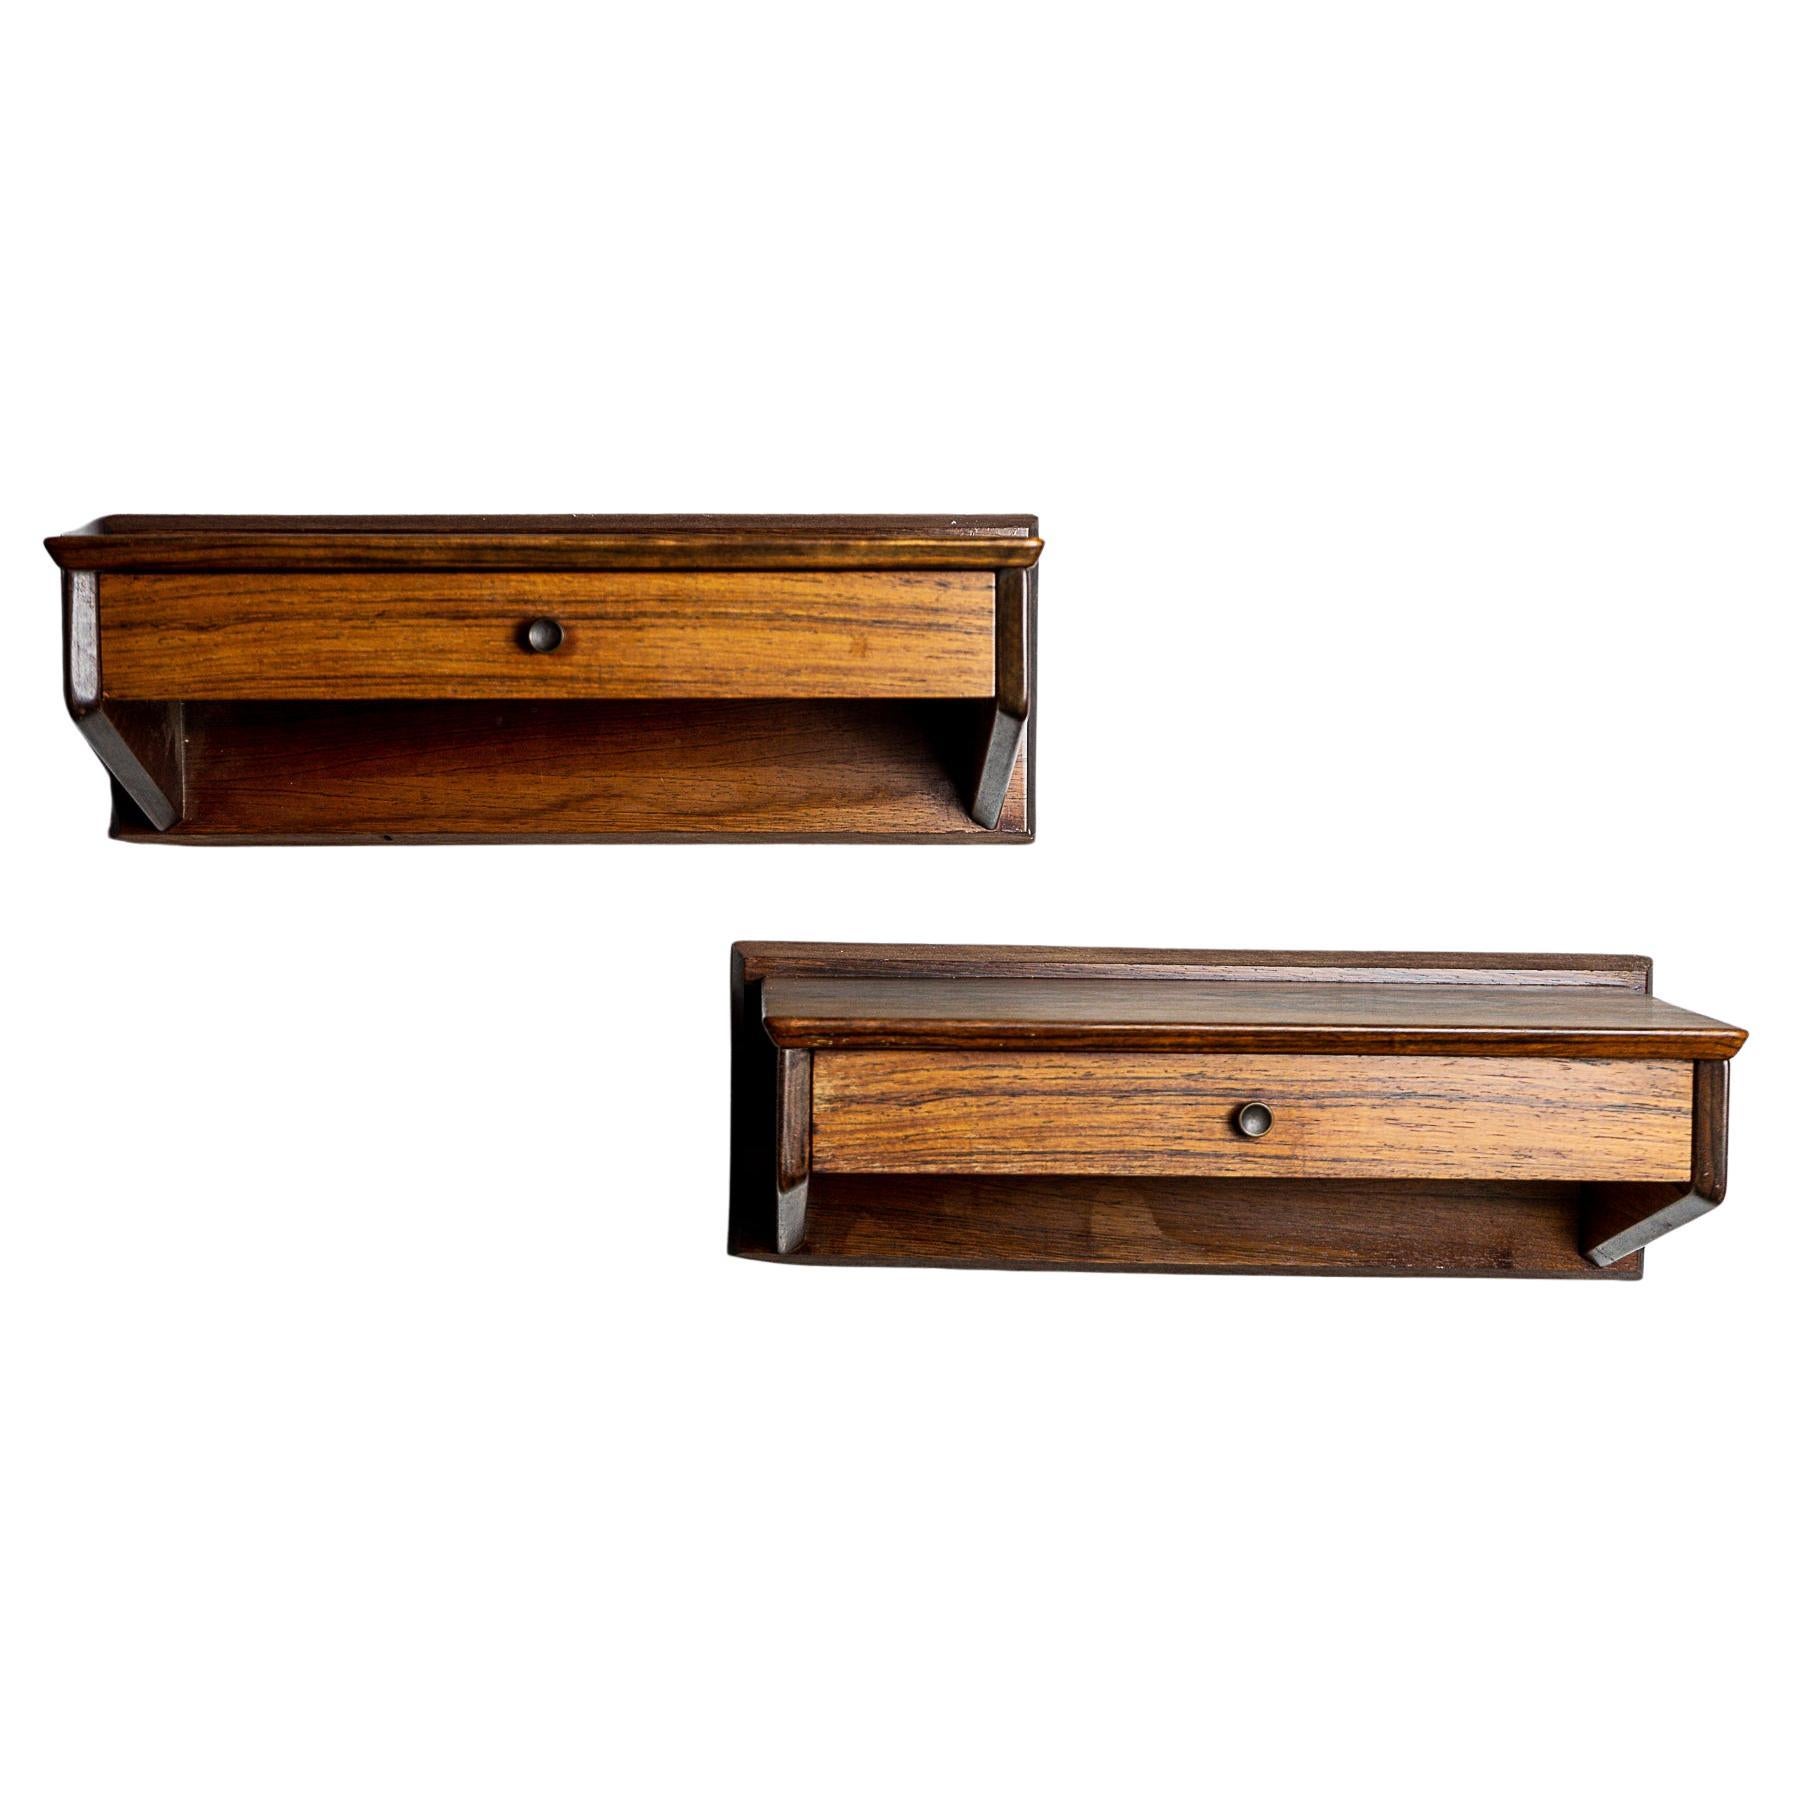 Pair of Danish Mid-Century Modern Rosewood Floating Bedsides / Nightstands For Sale